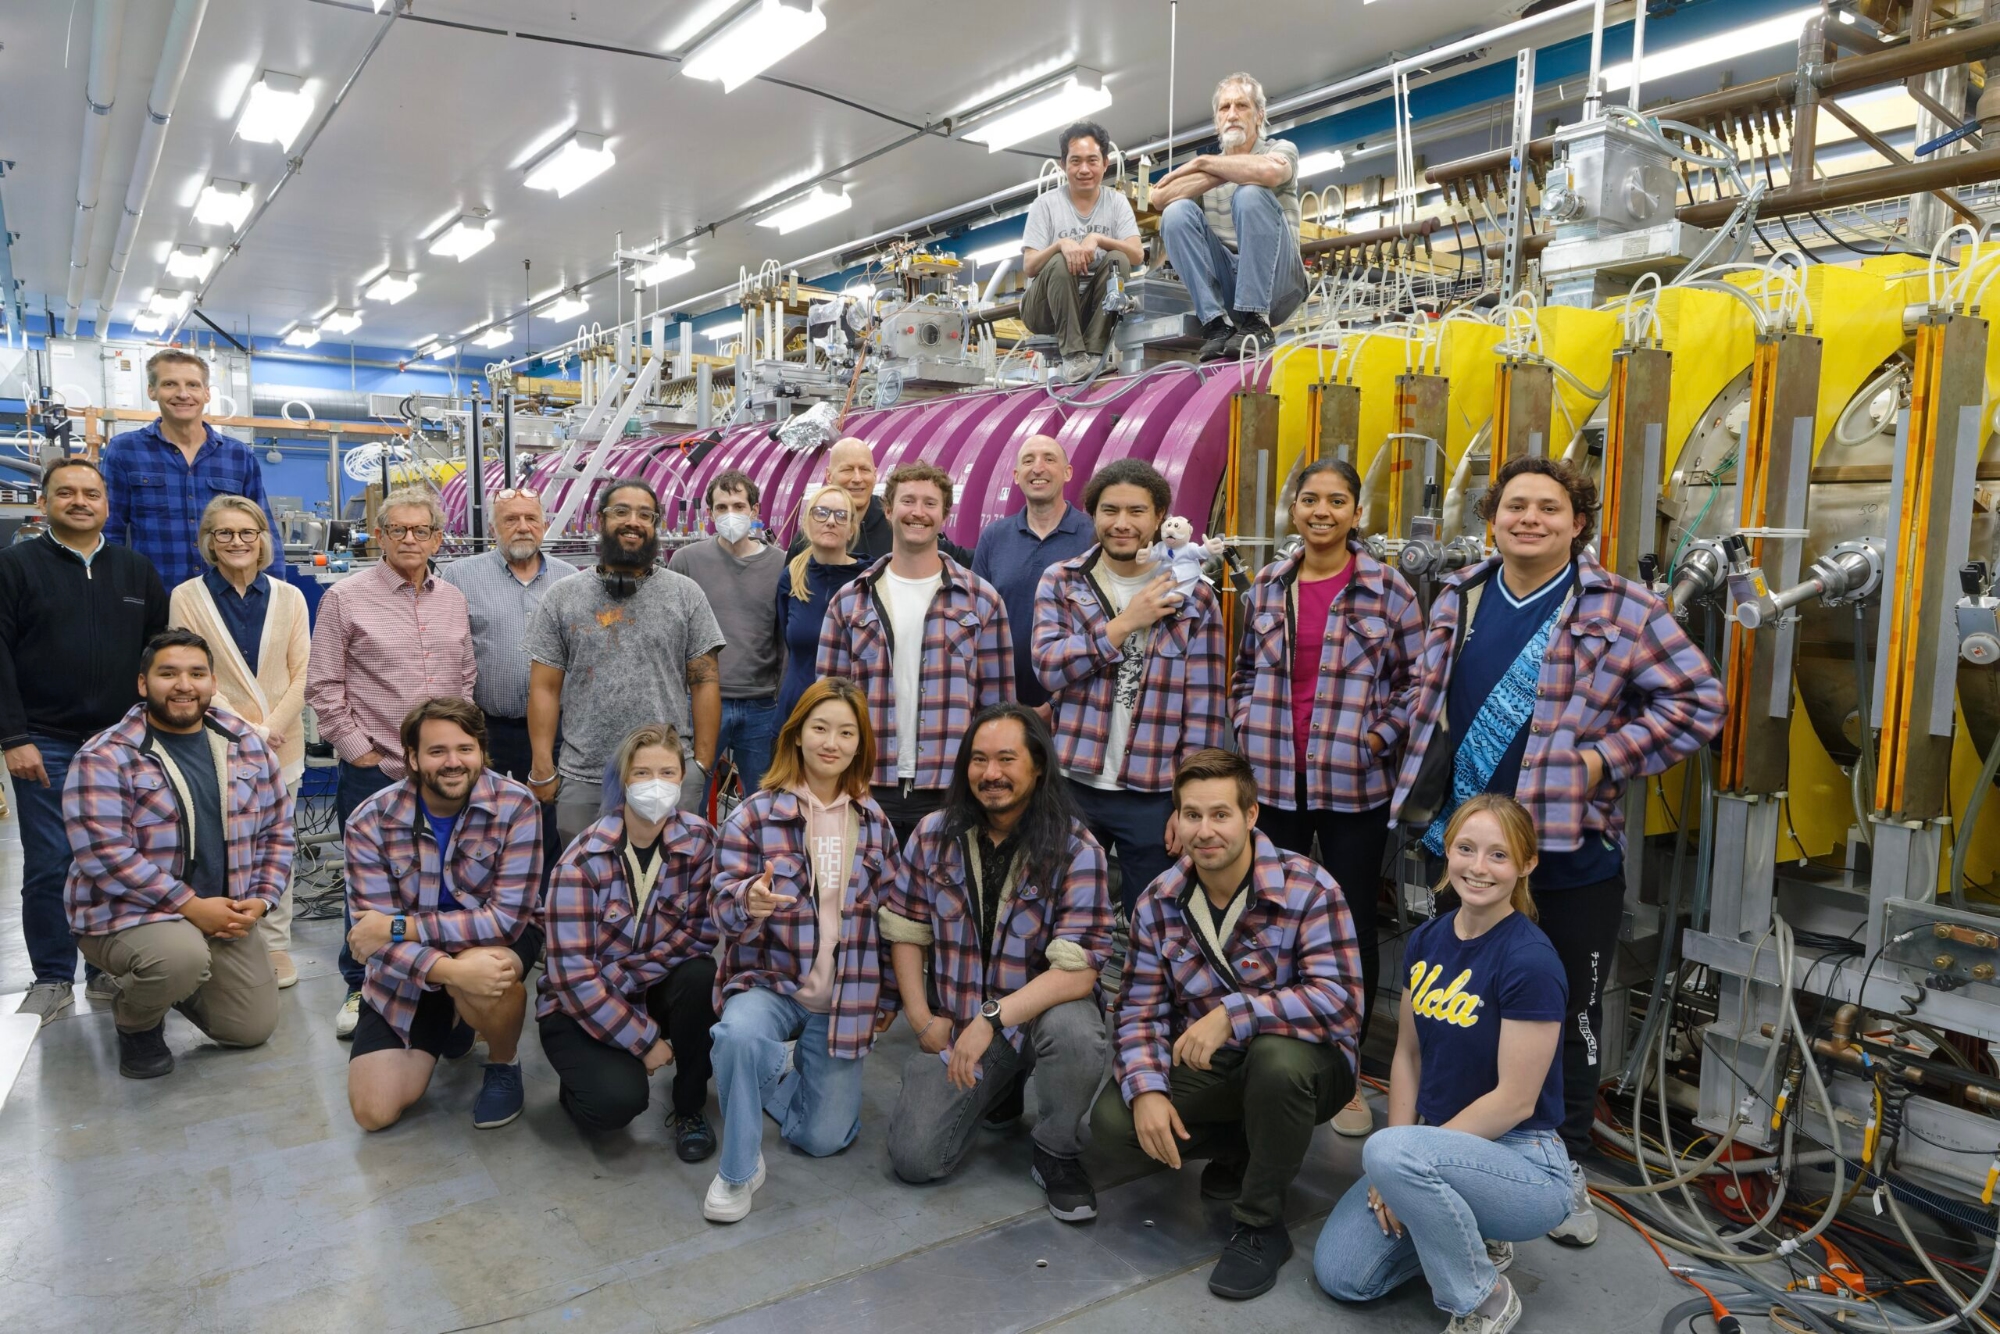 A group photo of UCLA’s Plasma Science researchers